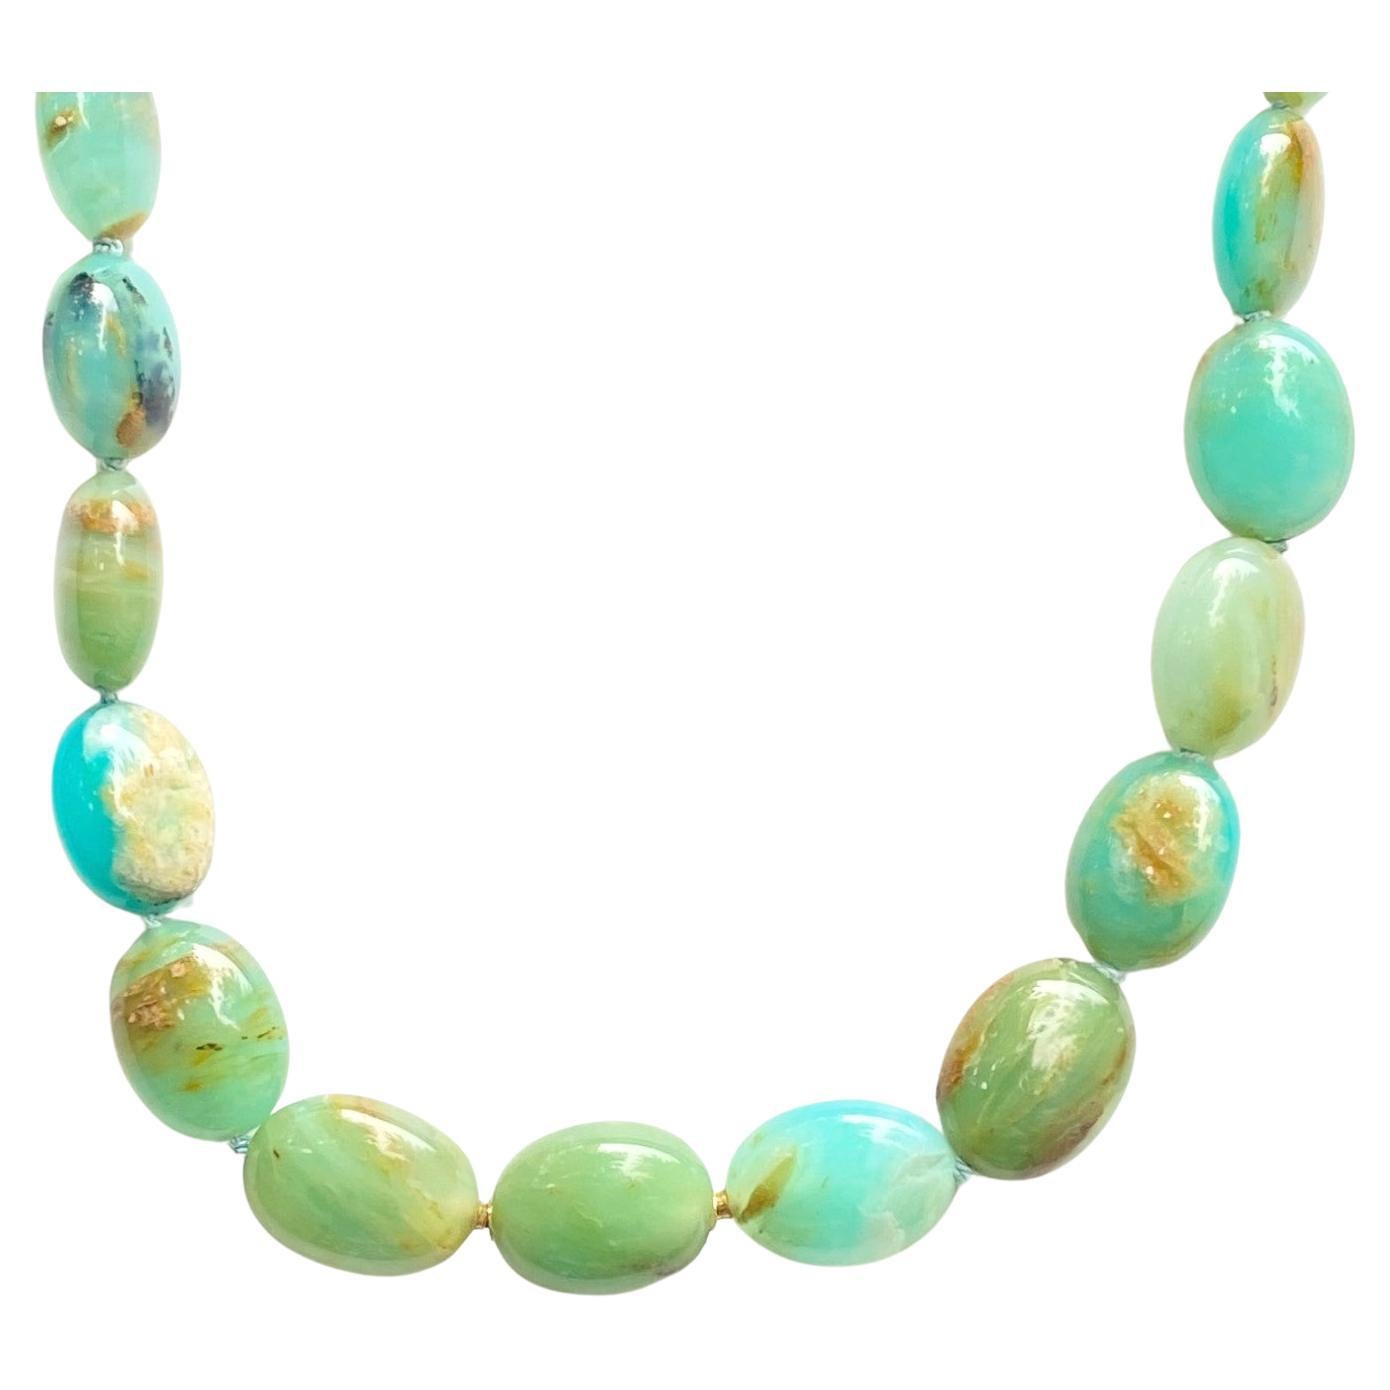 Modullyn Peruvian Opal Necklace For Sale